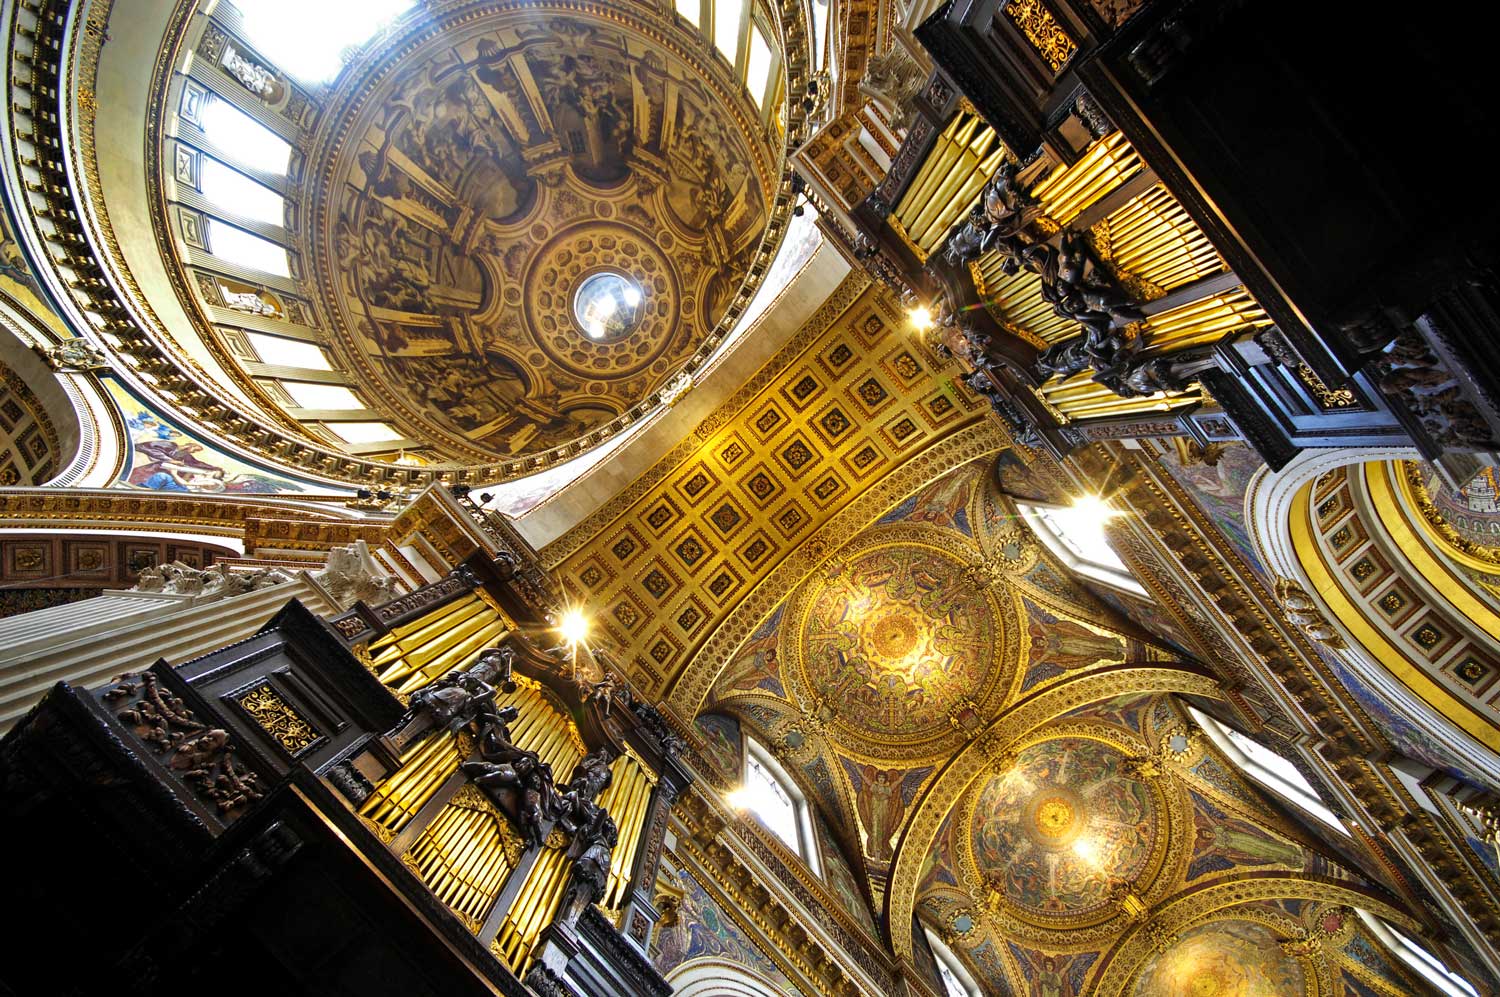 Organ and dome at St Paul's